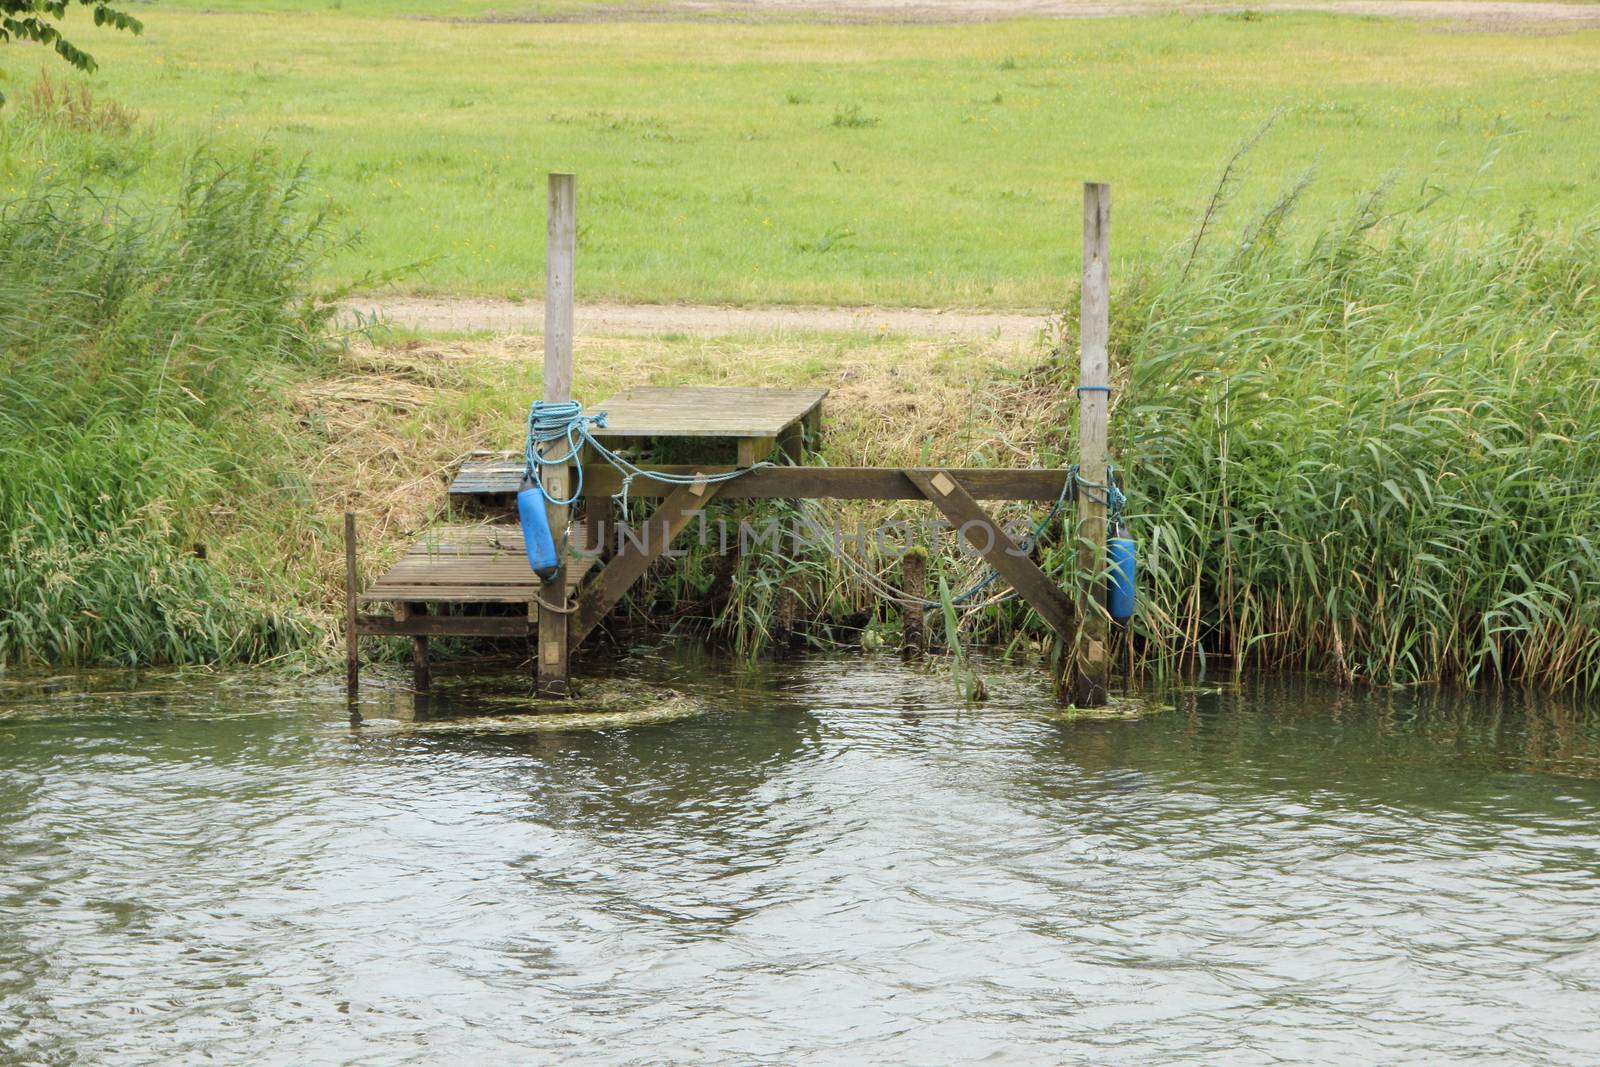 Vacant Landing Stage Jetty at Small River with Reed